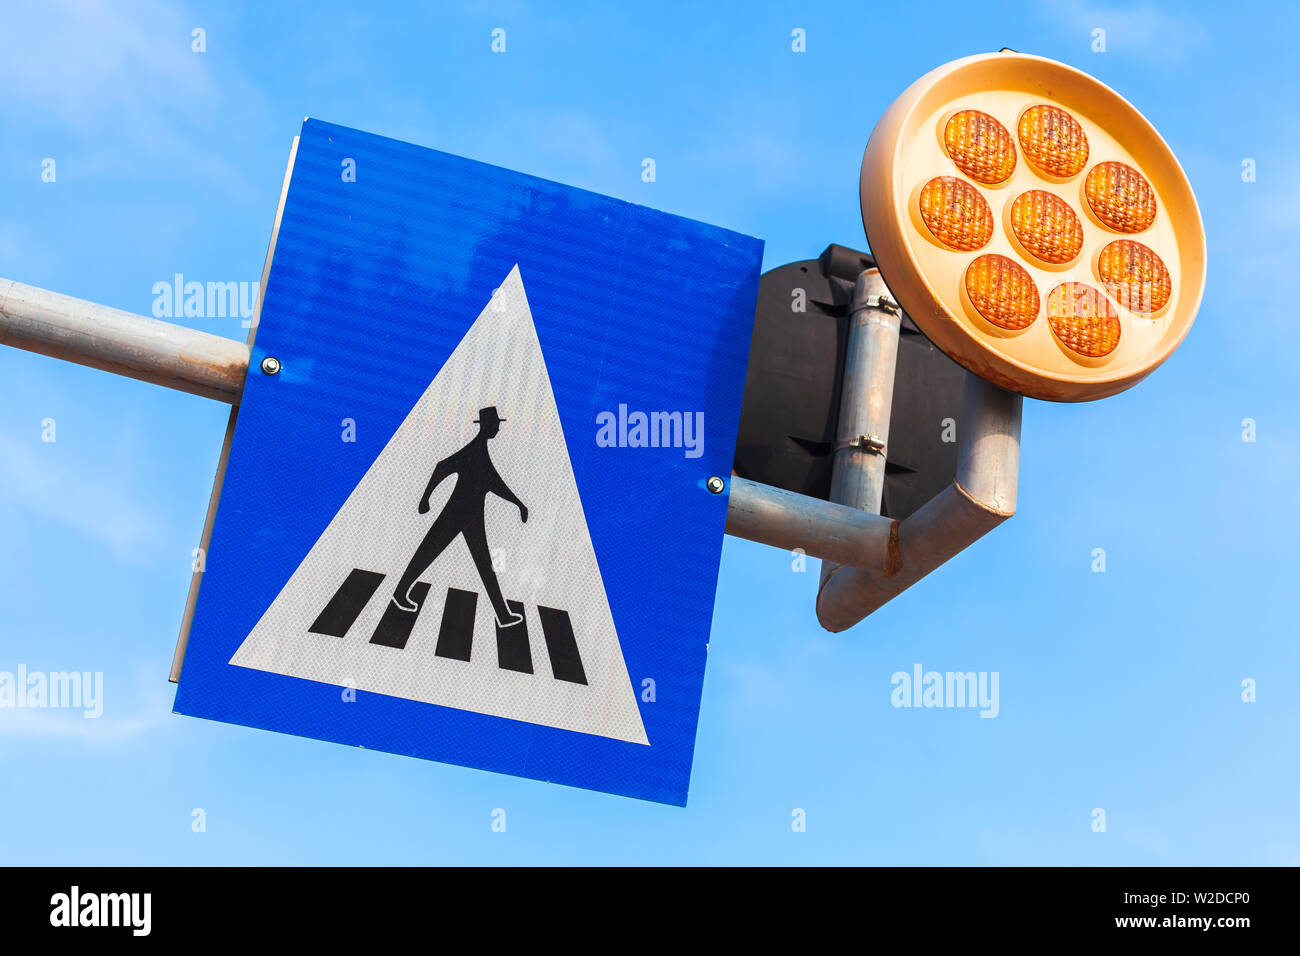 Pedestrian crossing. Road sign and yellow warning lights over blue sky background Stock Photo